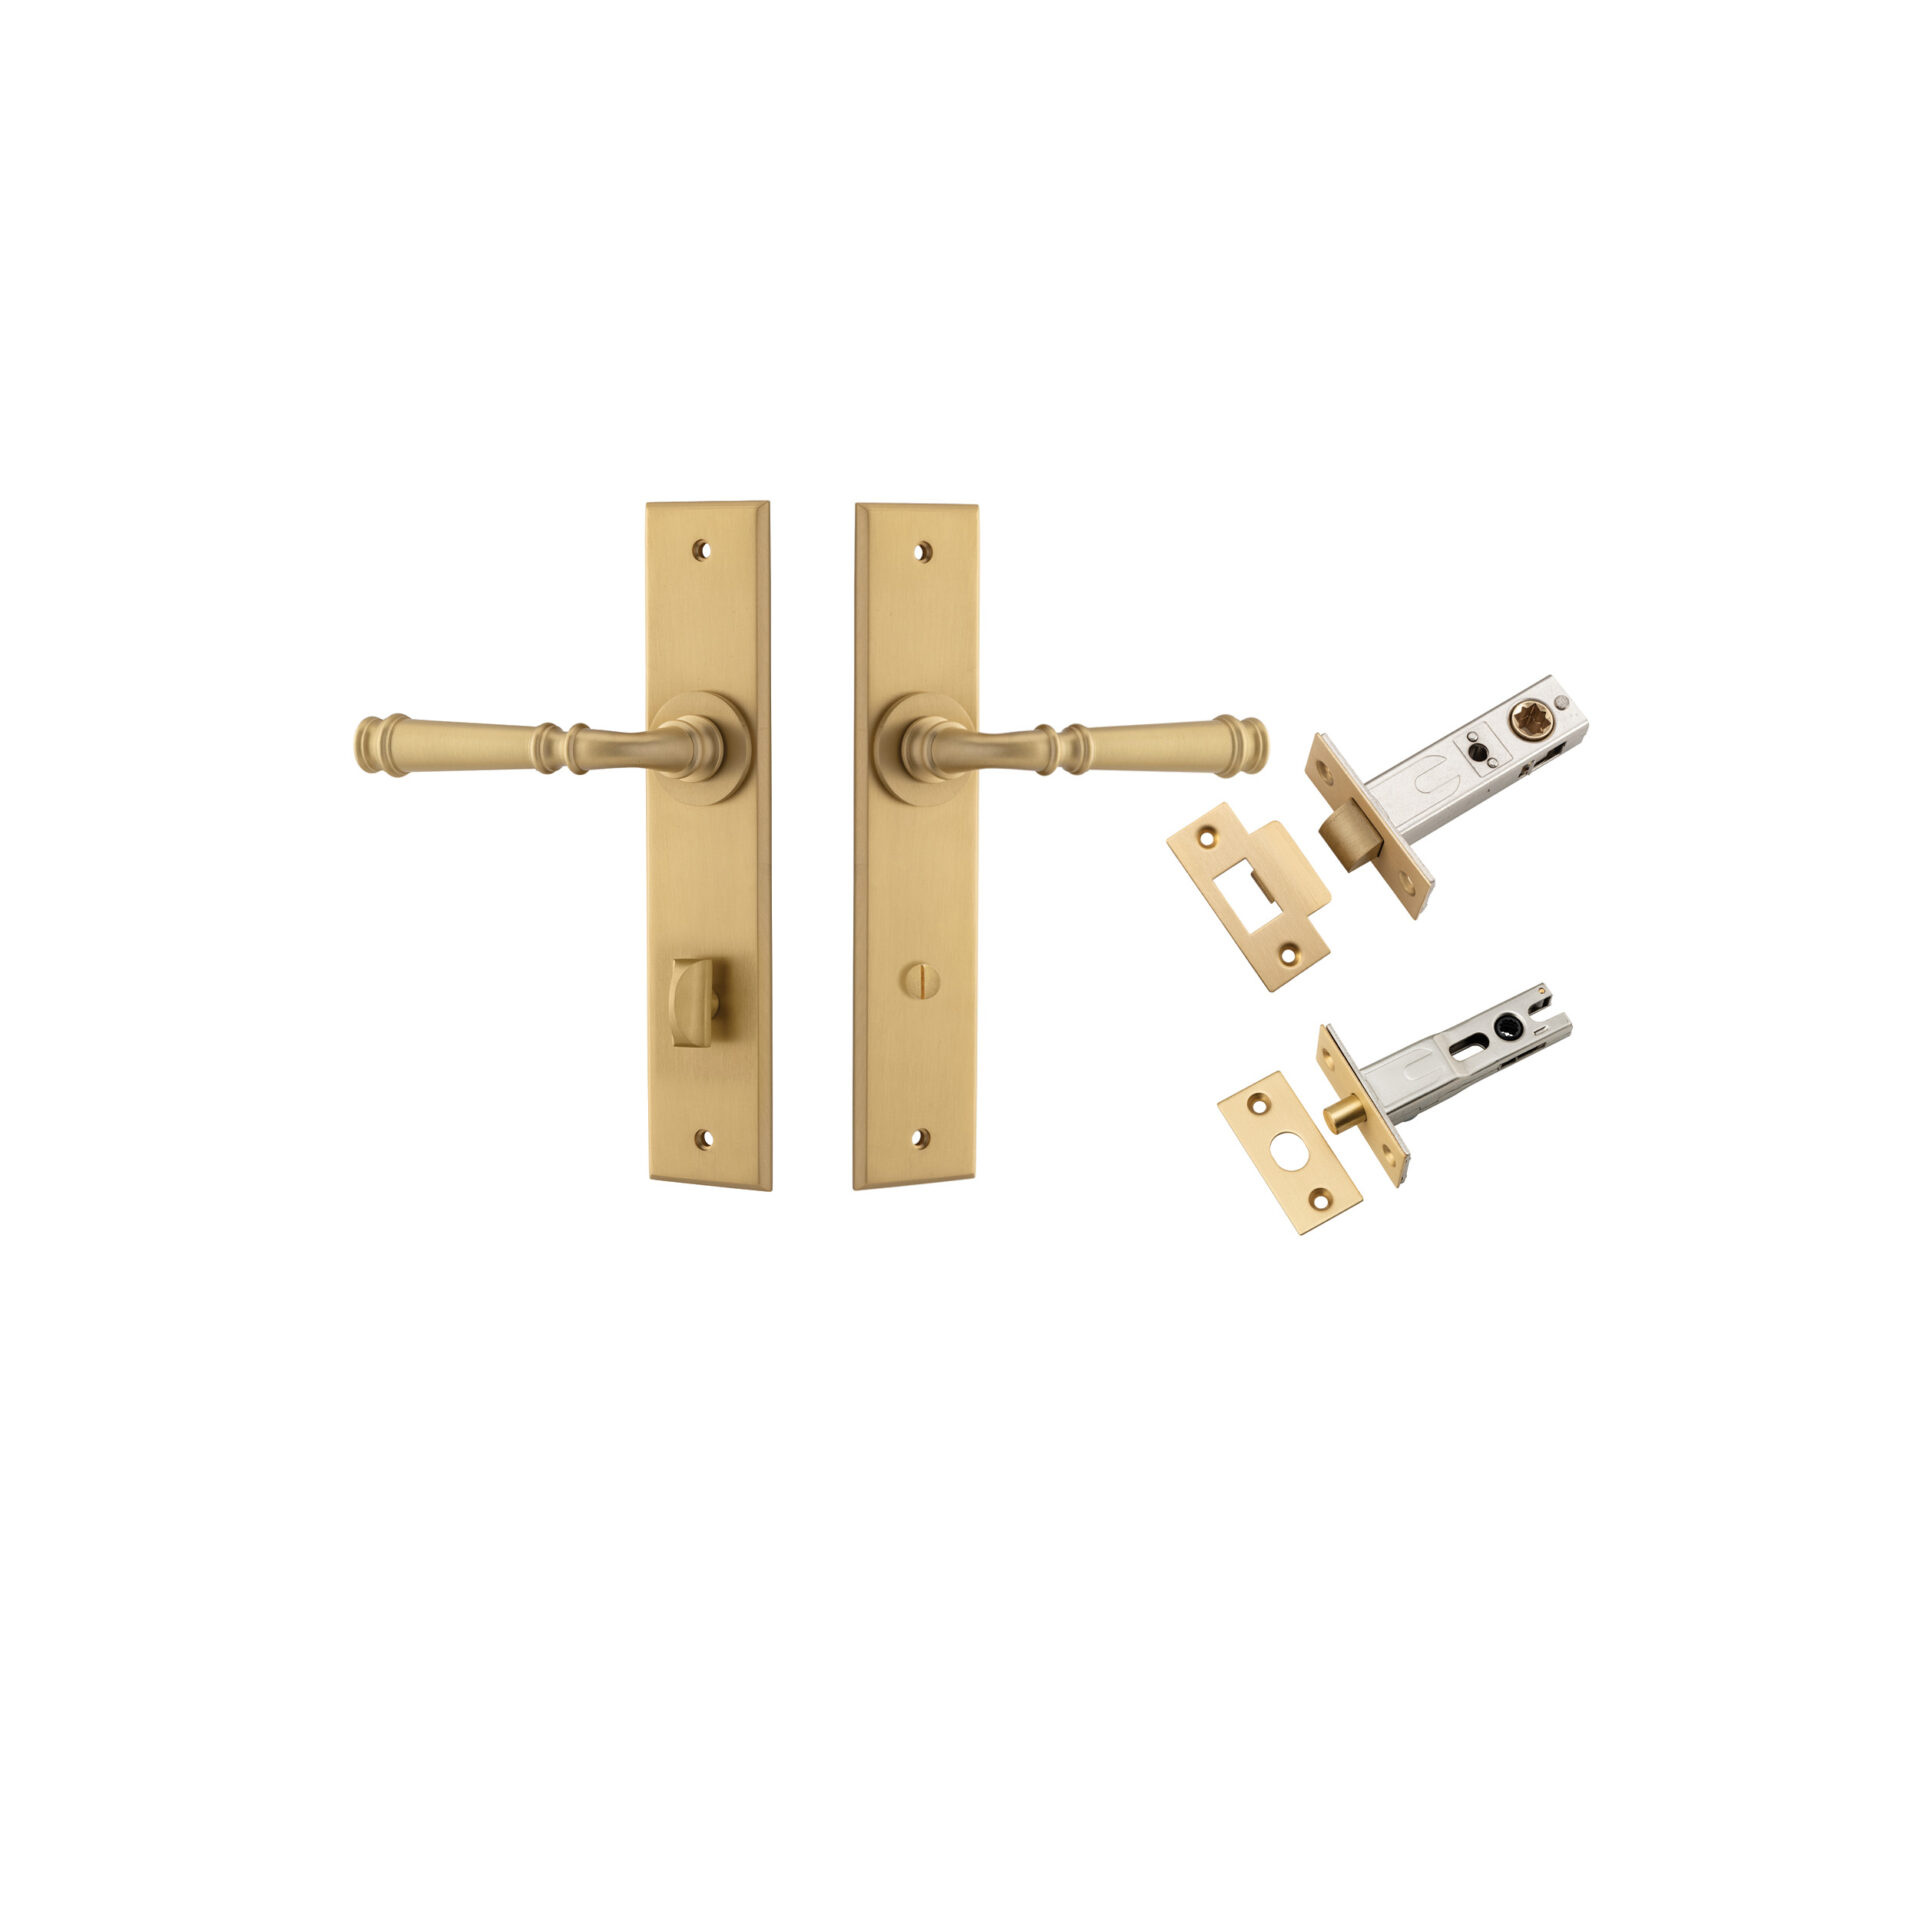 13286KPRIV60 - Verona Lever - Chamfered  Backplate Privacy Kit with Privacy Turn - Brushed Brass - Privacy